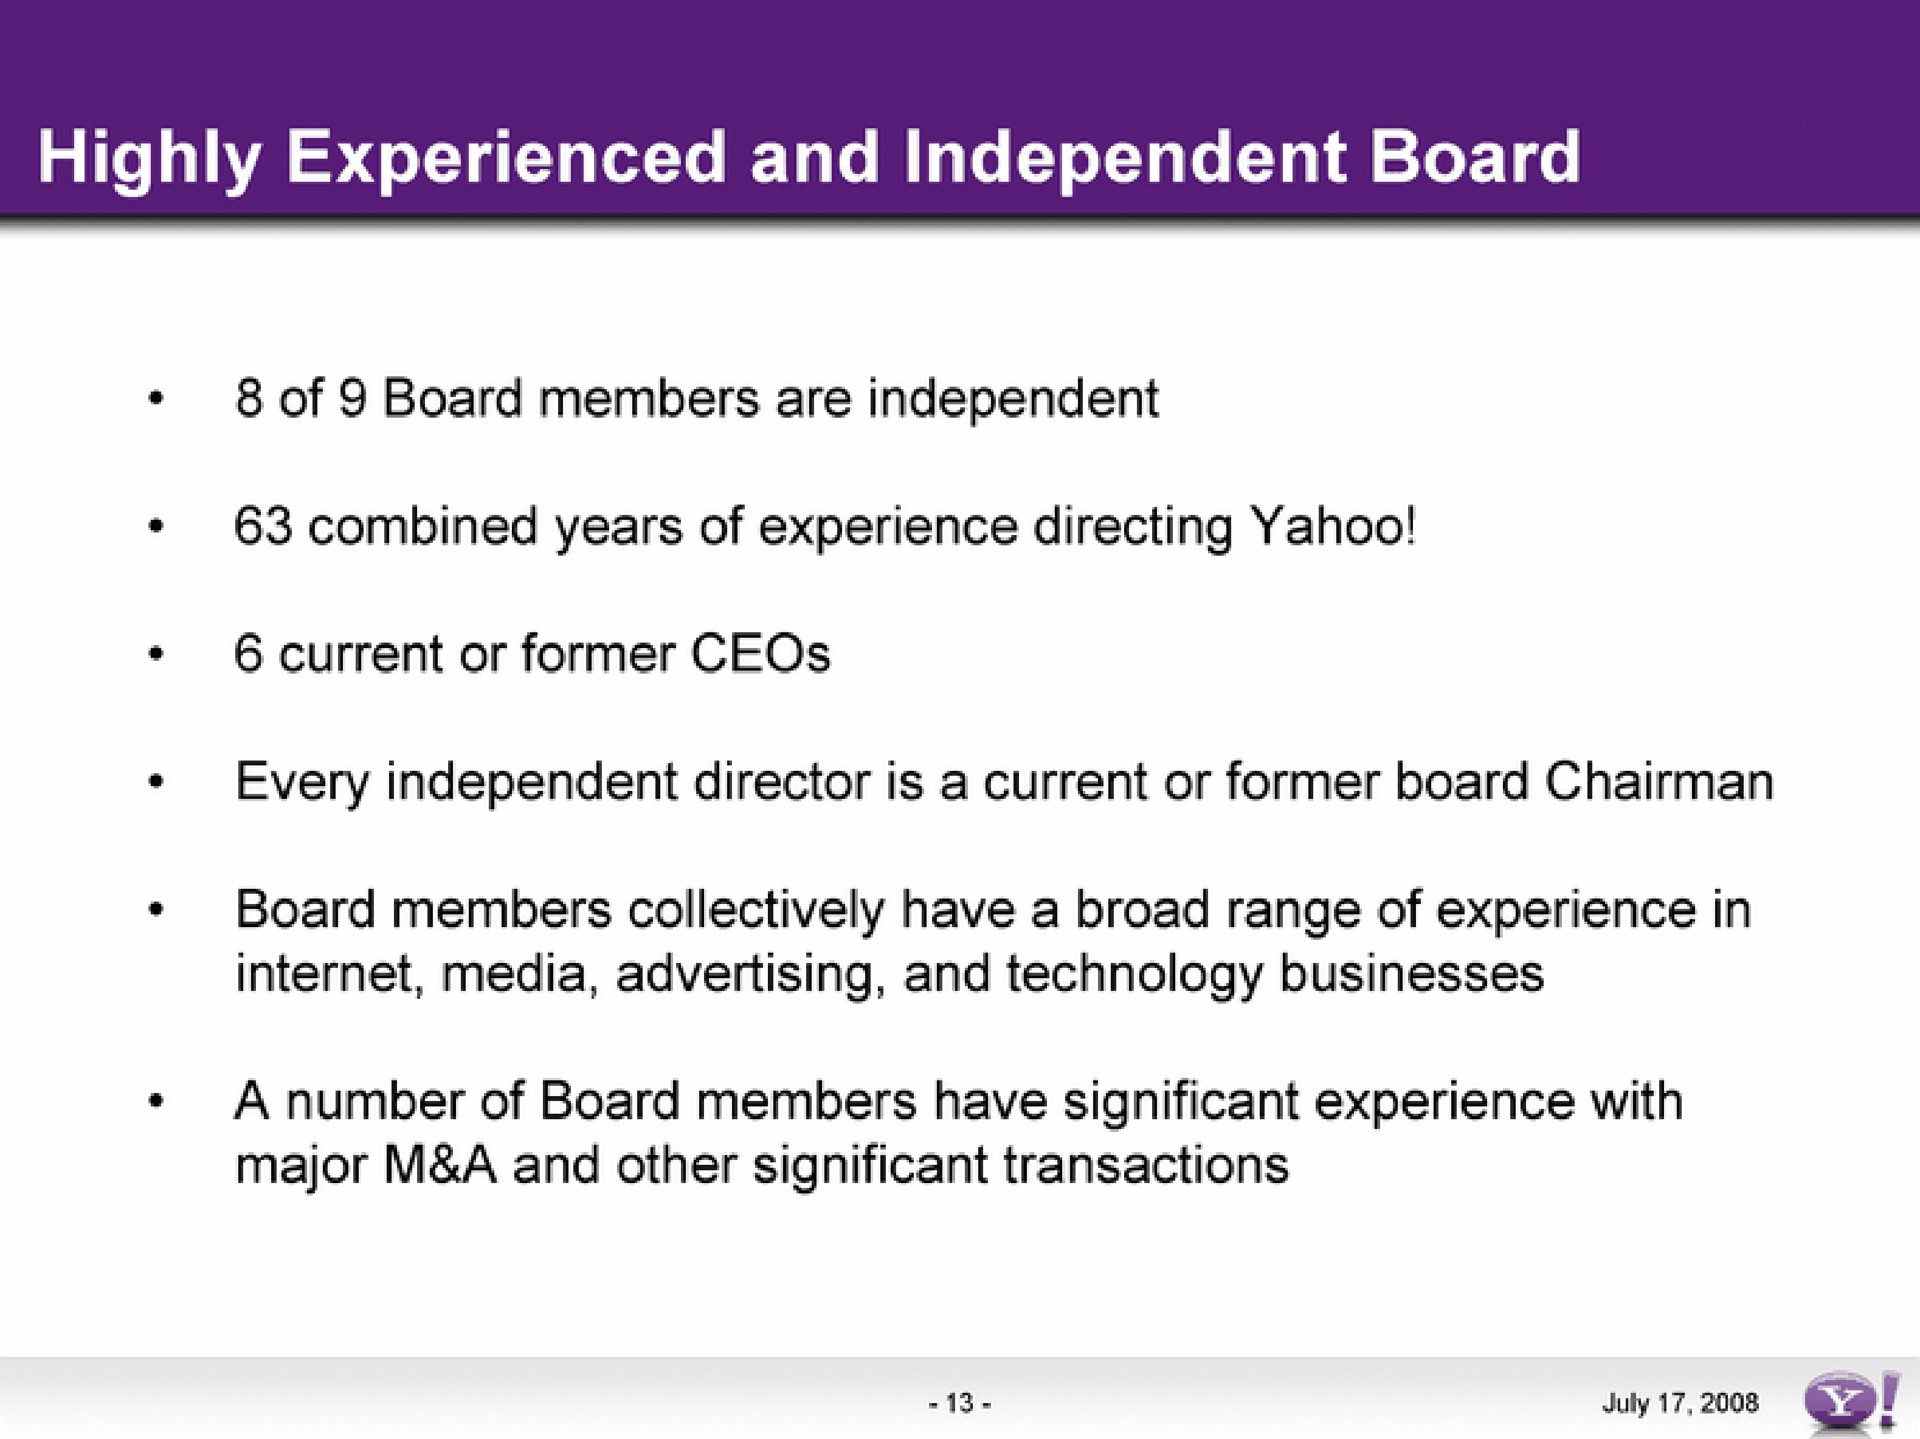 highly experienced and independent board | Yahoo